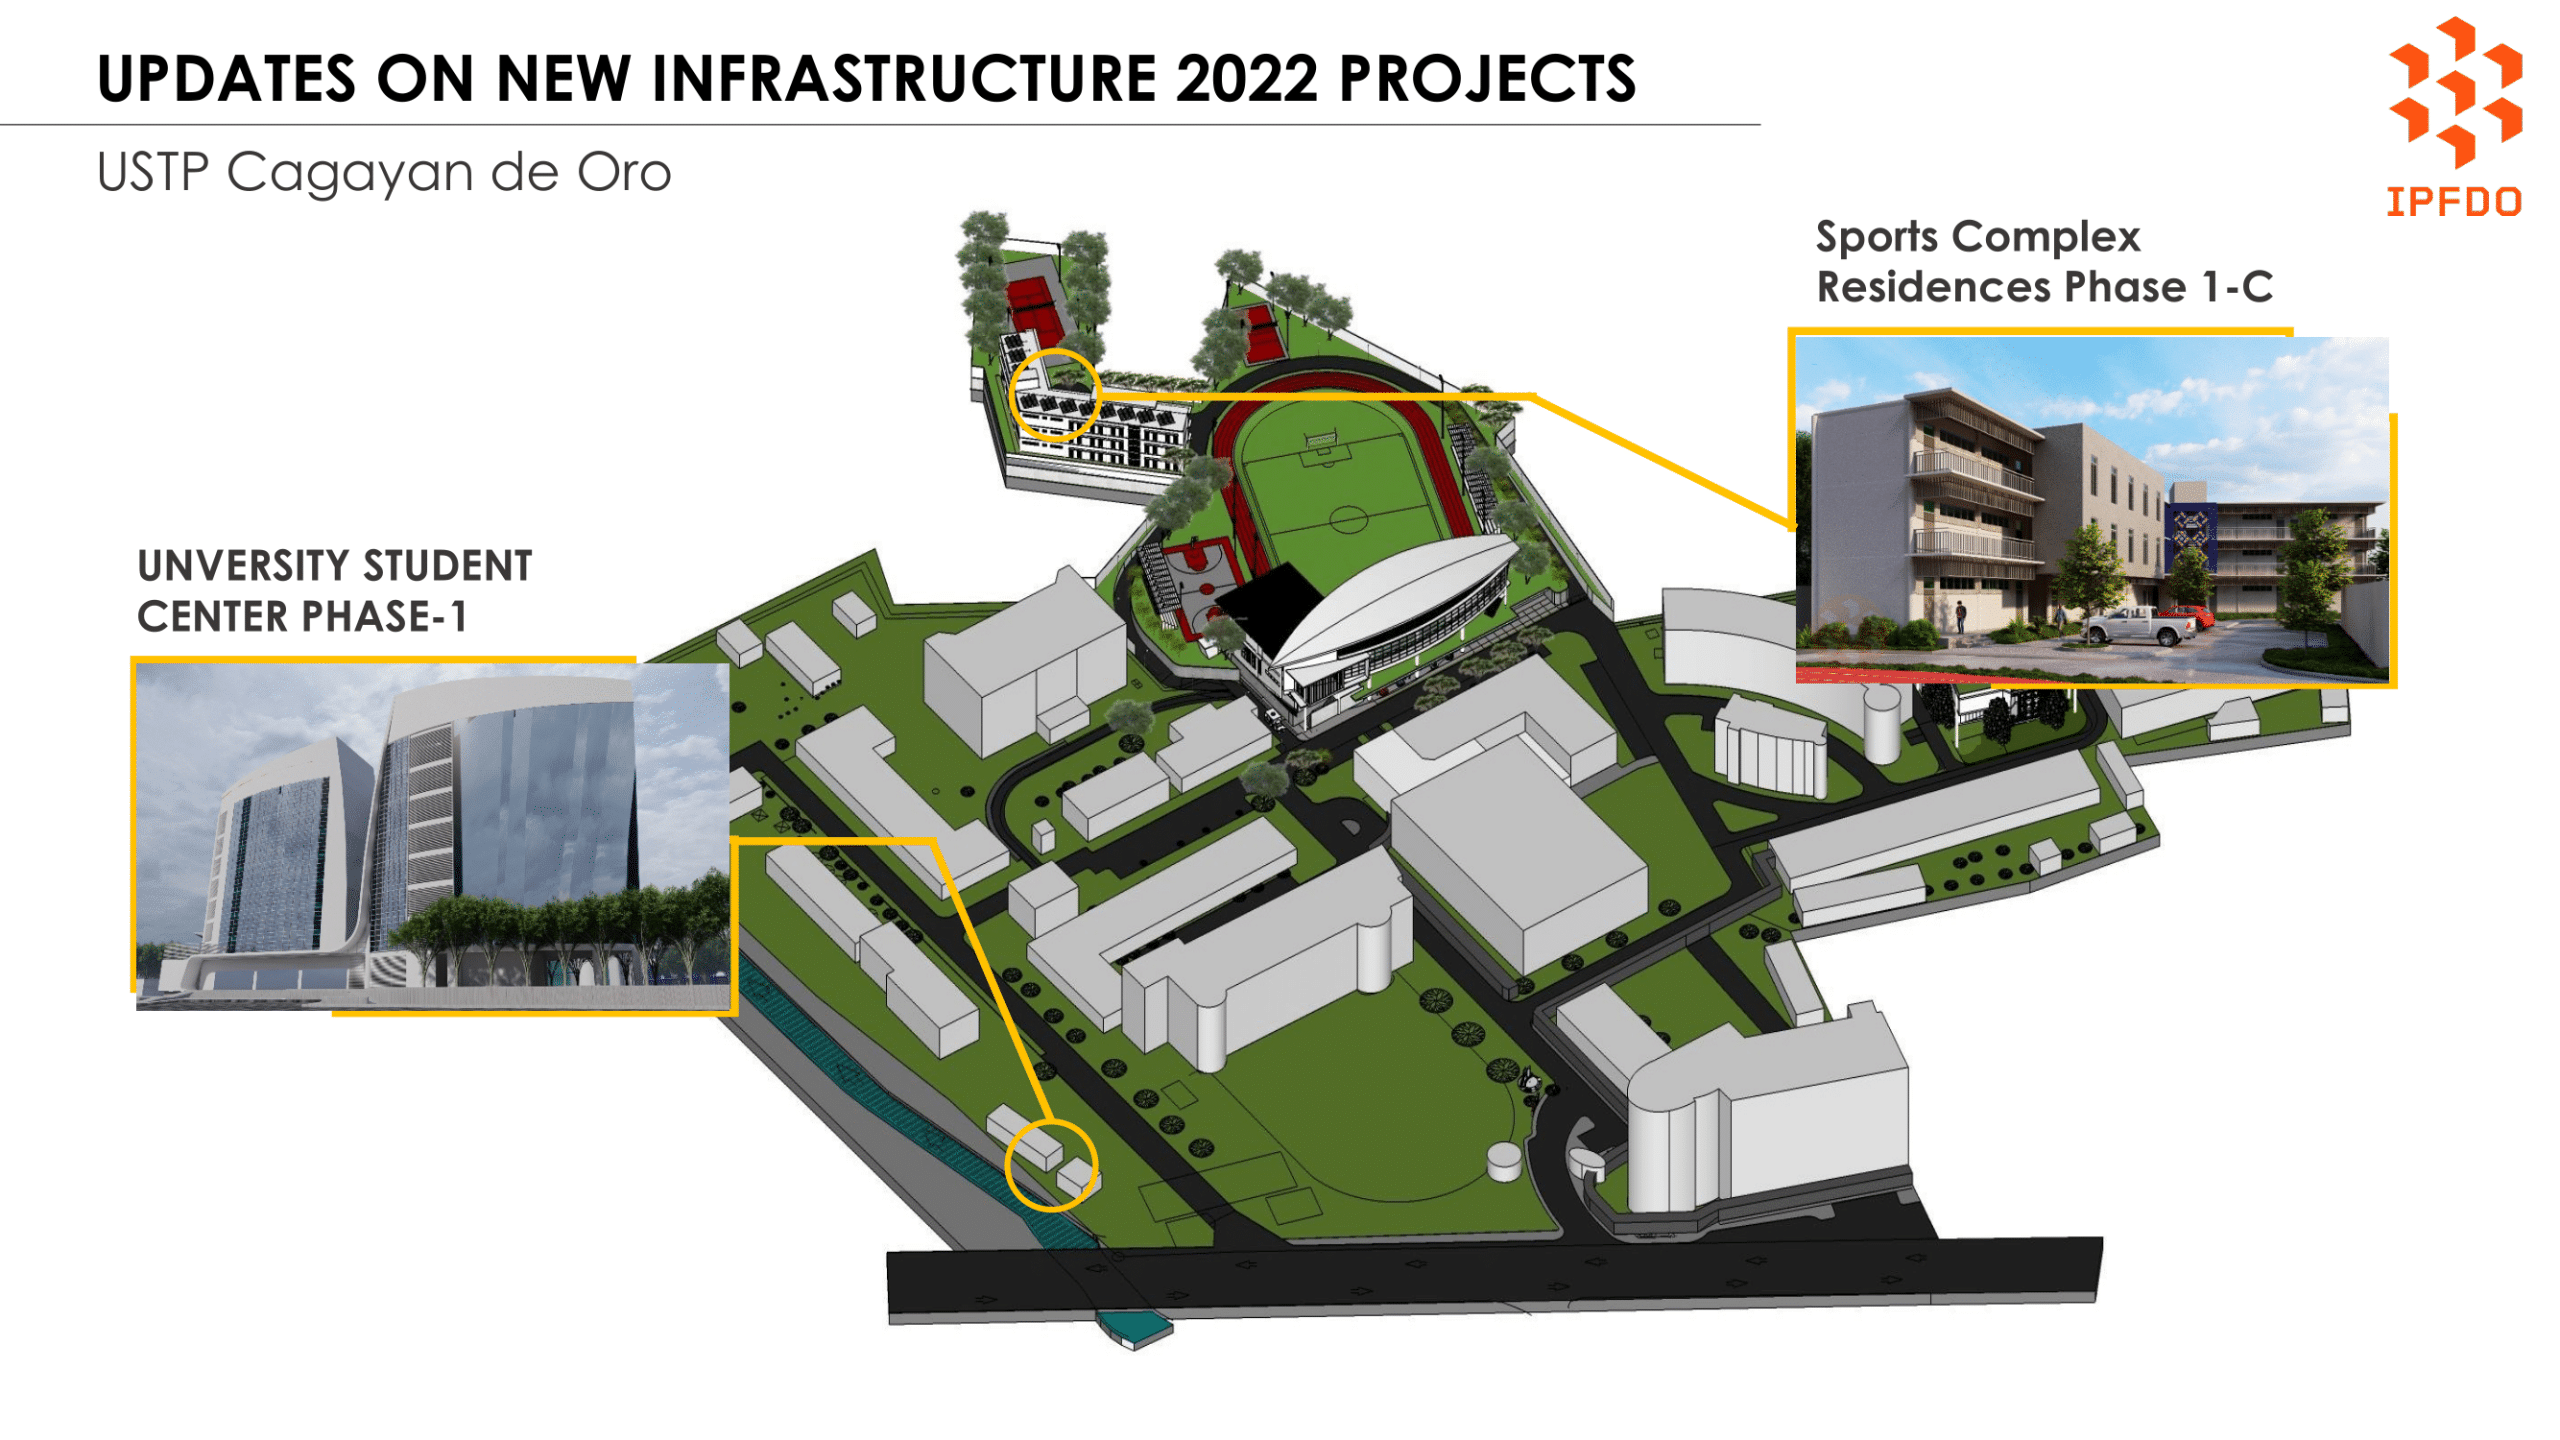 Updates on New Infrastructure 2022 Projects - USTP Cagayan de Oro